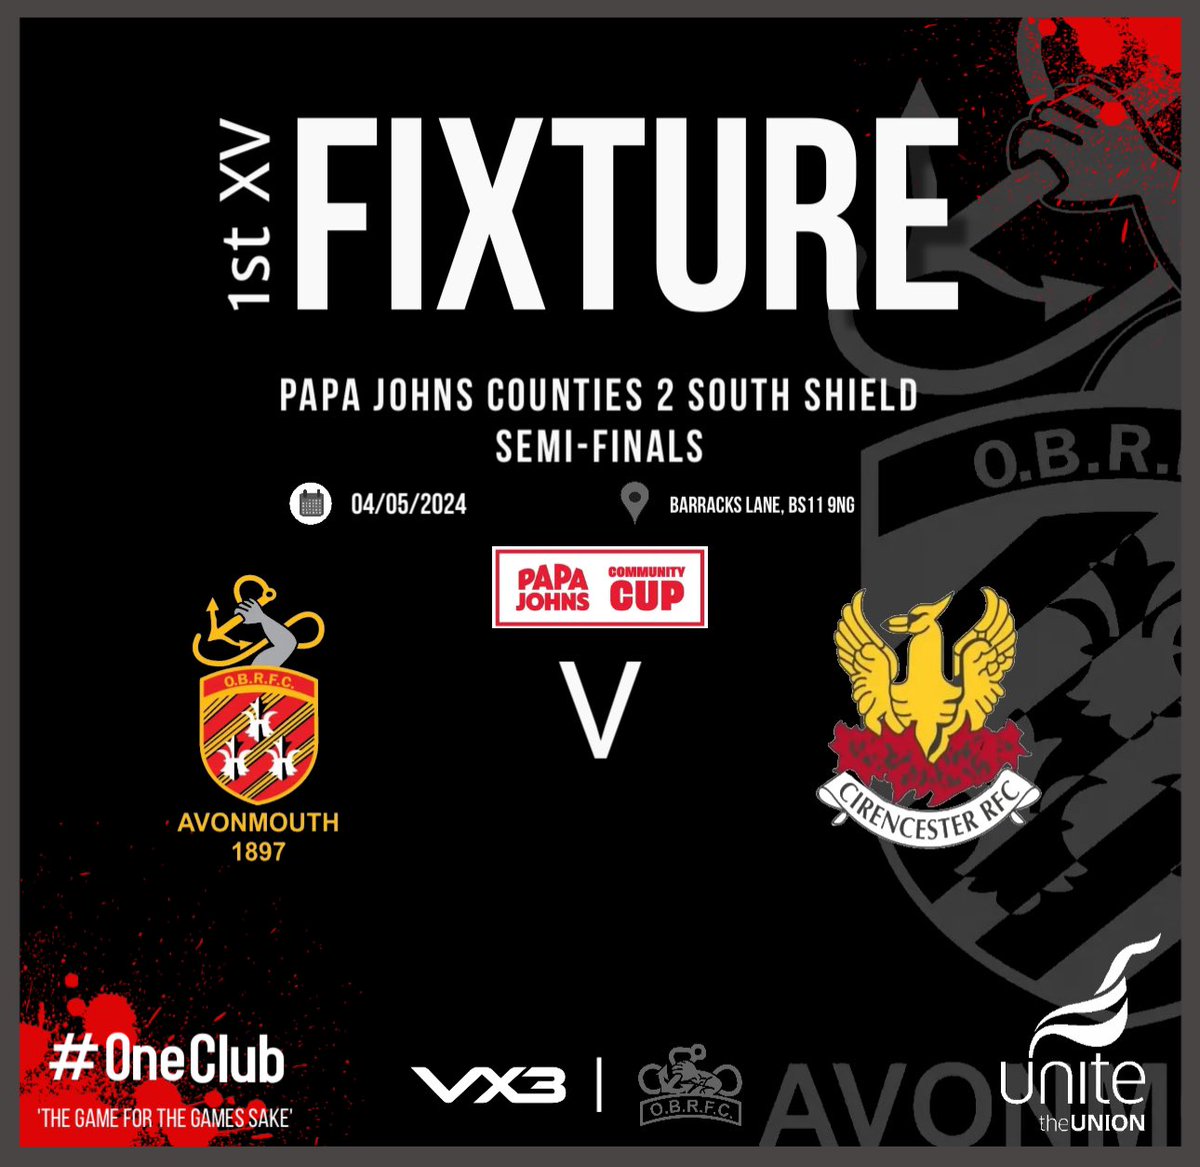 Fixture⤵️ This weekend will see our 1’s face @CirencesterRFC at Home in the Semi-Final Papa Johns Community Cup - Counties 2 South Shield. KO 3pm, Barracks Lane… ⚫️🔴⚫️ @GRFUrugby @swsportsnews @BSDistrictRugby @PapaJohnsUK